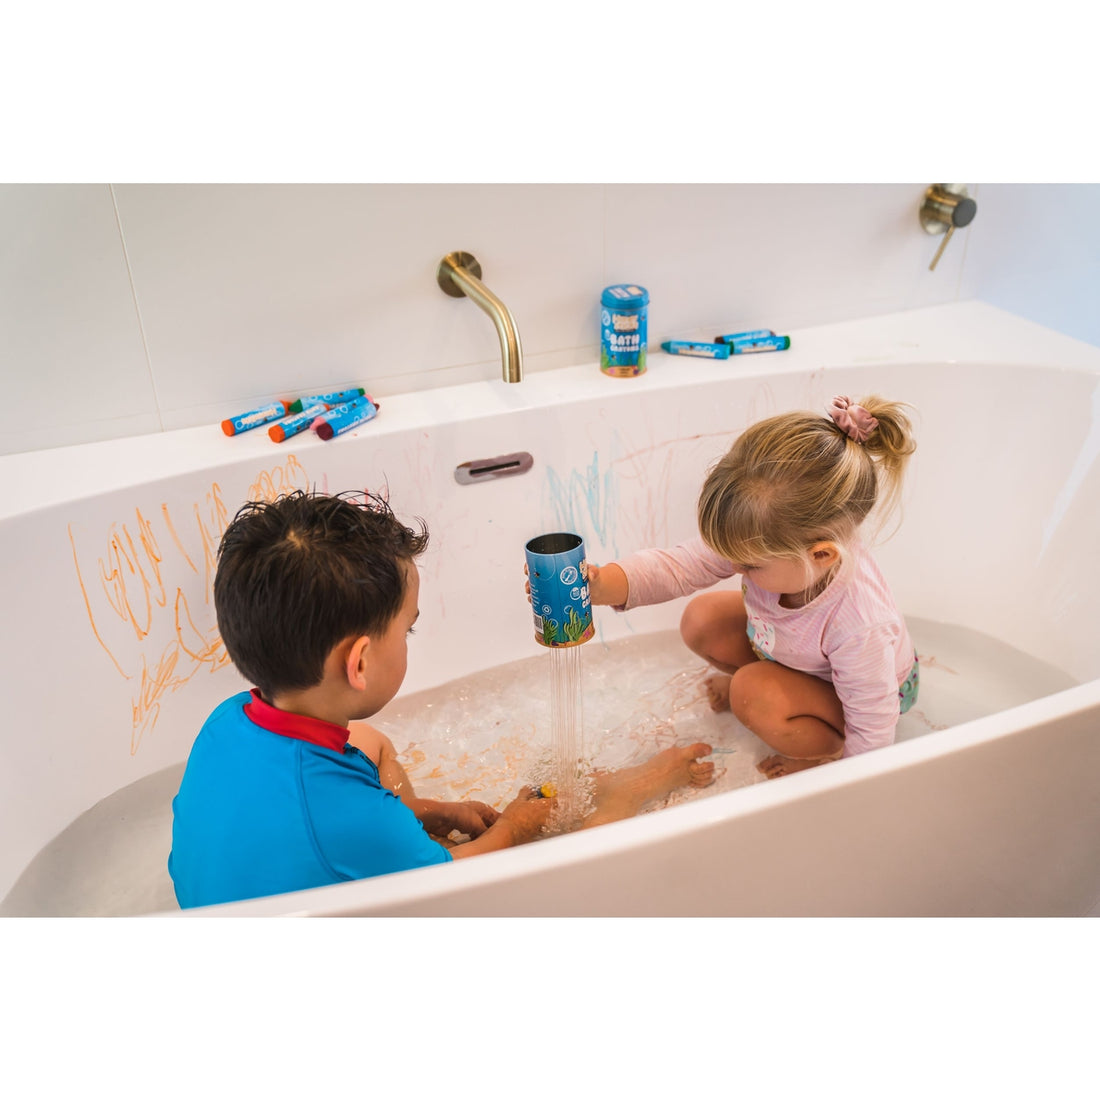 Two children playing in a bath with Bath Crayons